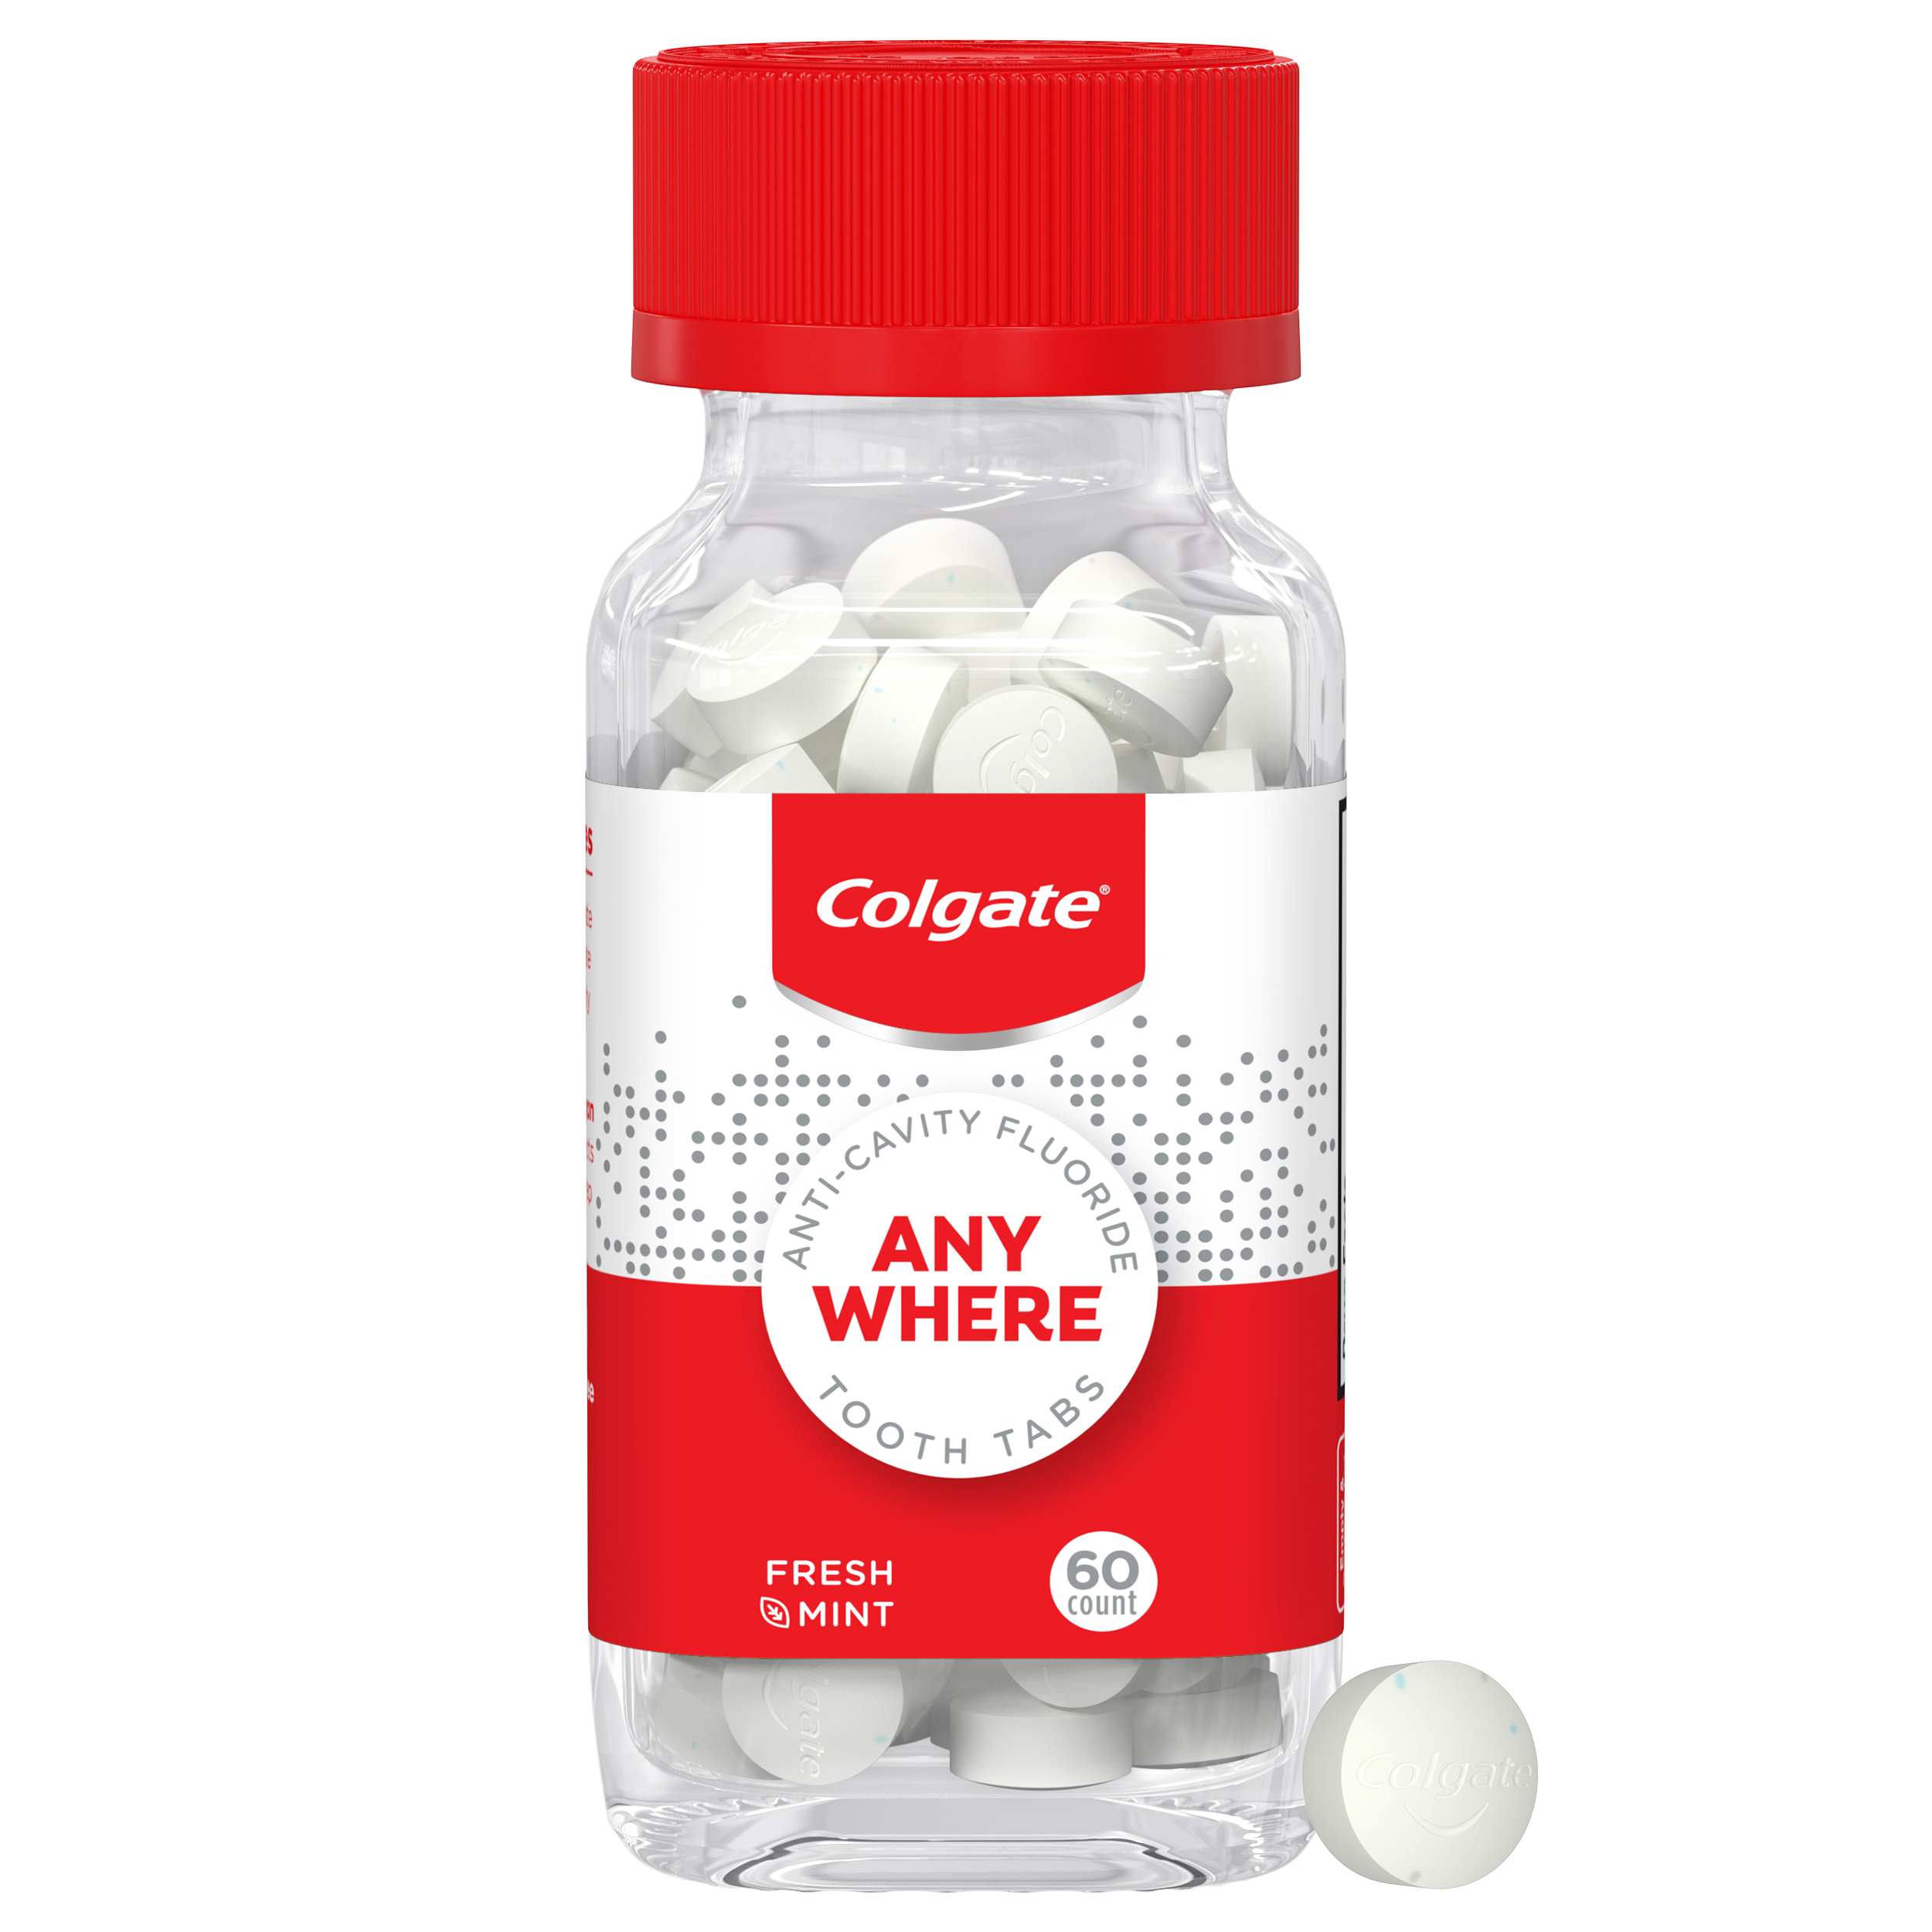 Colgate Anywhere Anticavity Toothpaste Tablets